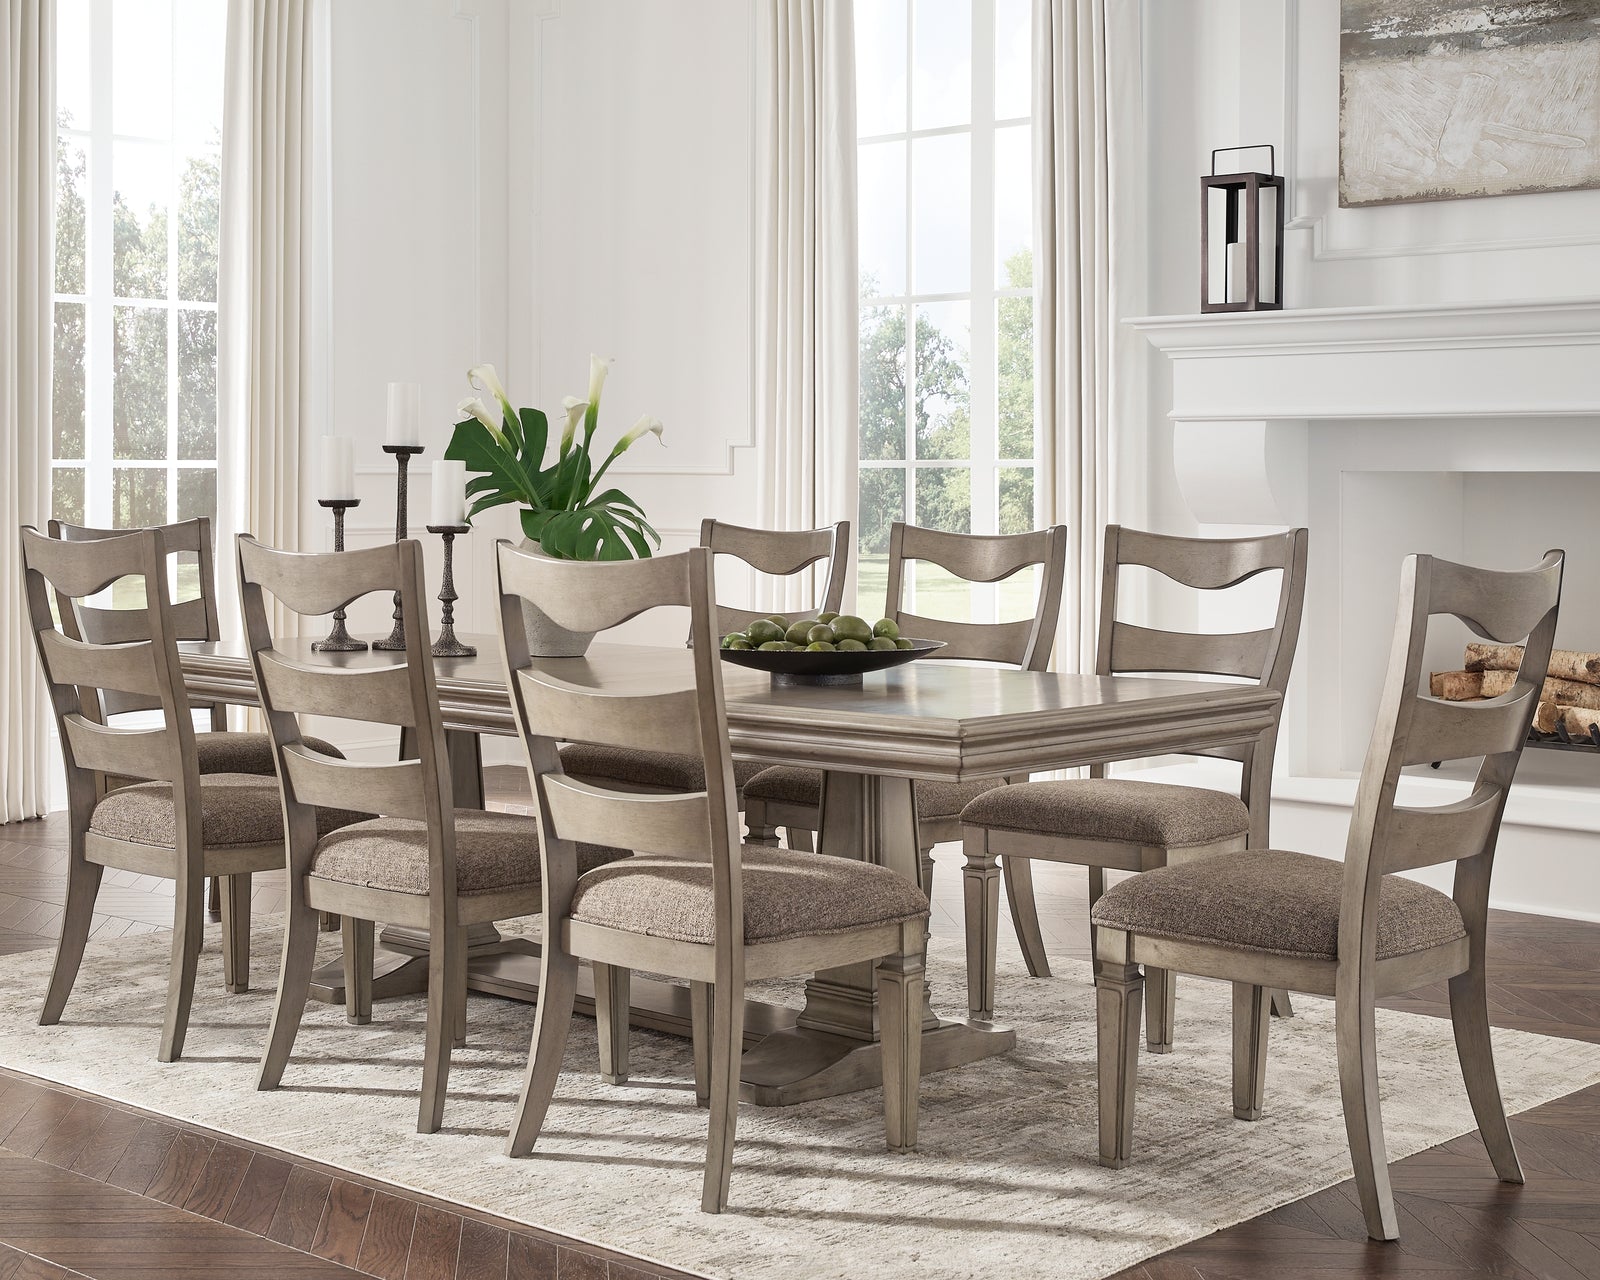 Lexorne Gray Dining Table And 8 Chairs With Storage